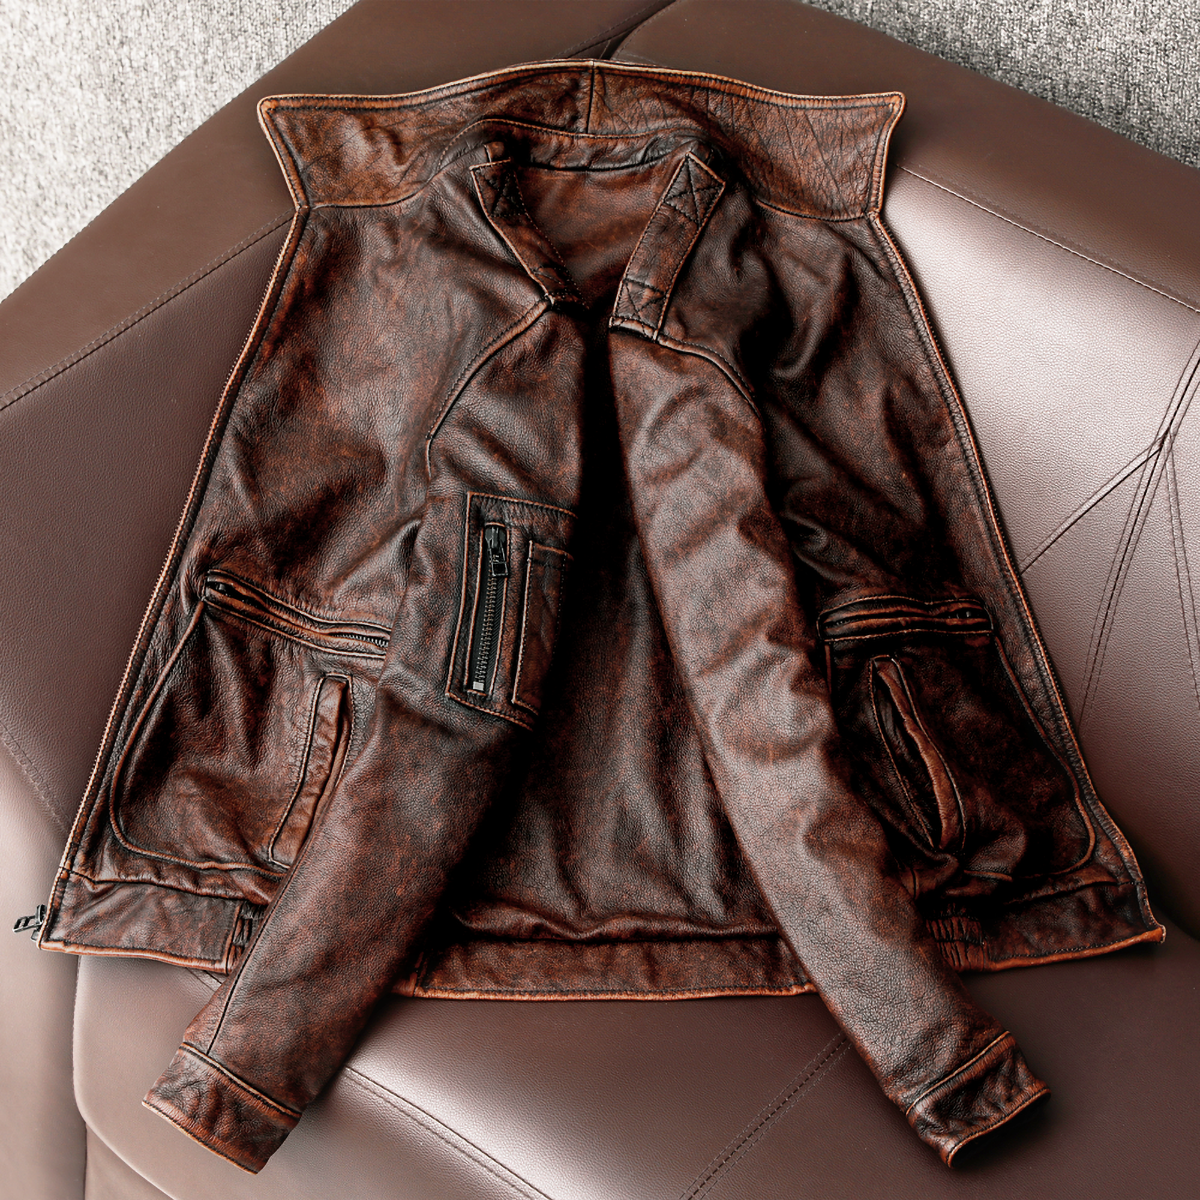 Air Force 2 Motorcycle Leather Jacket